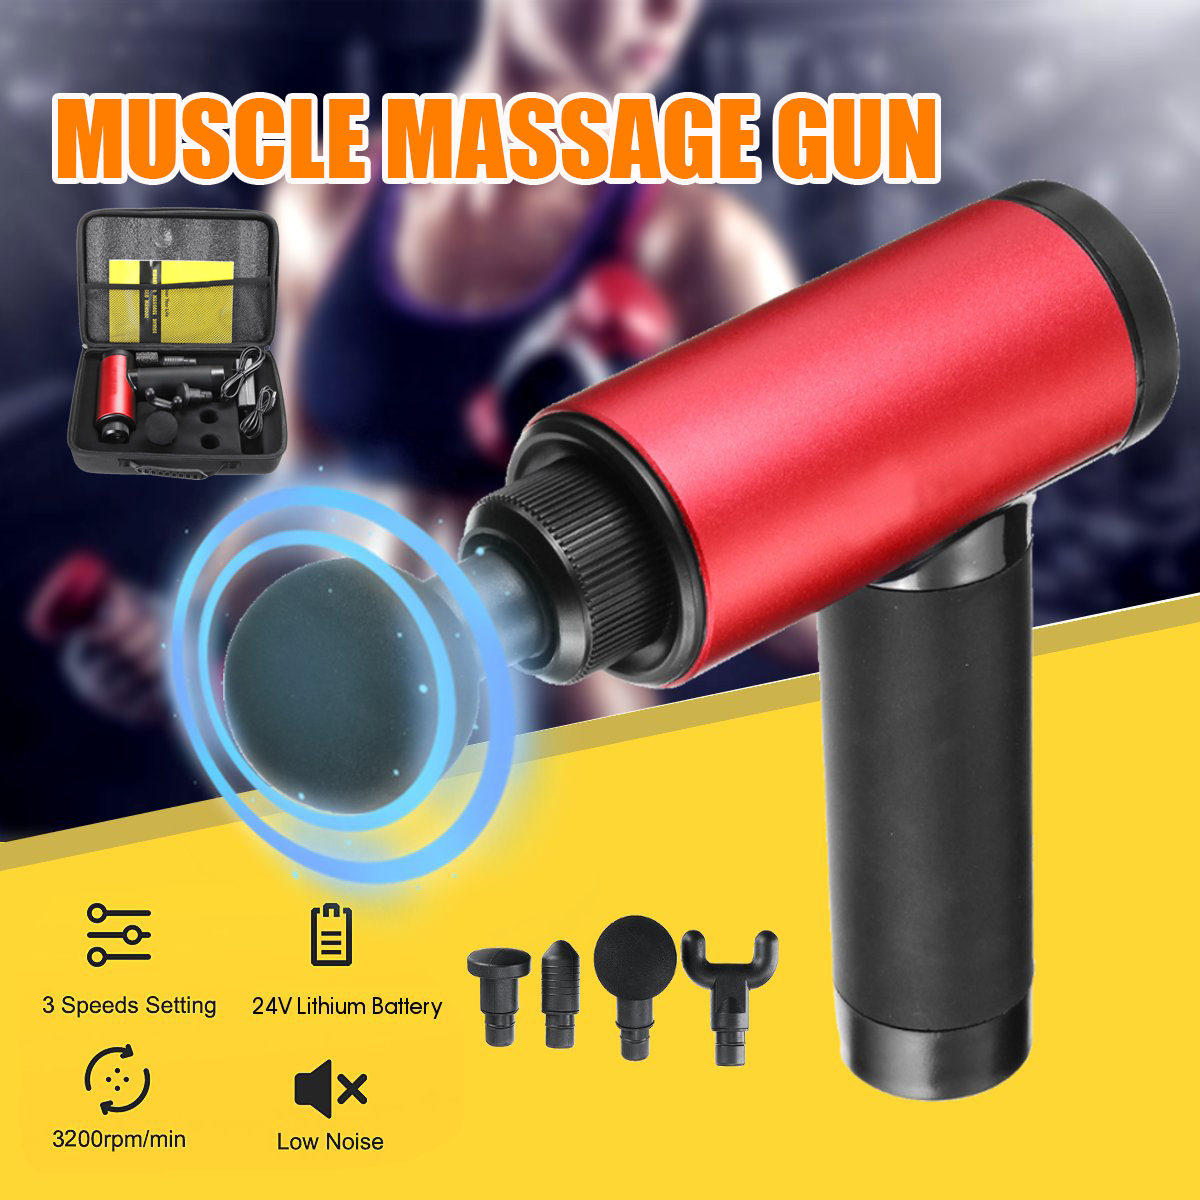 Vibrating-Massager-Therapy-G-un-Electric-Vibration-Muscle-Massage-Therapy-Device-1503348-1